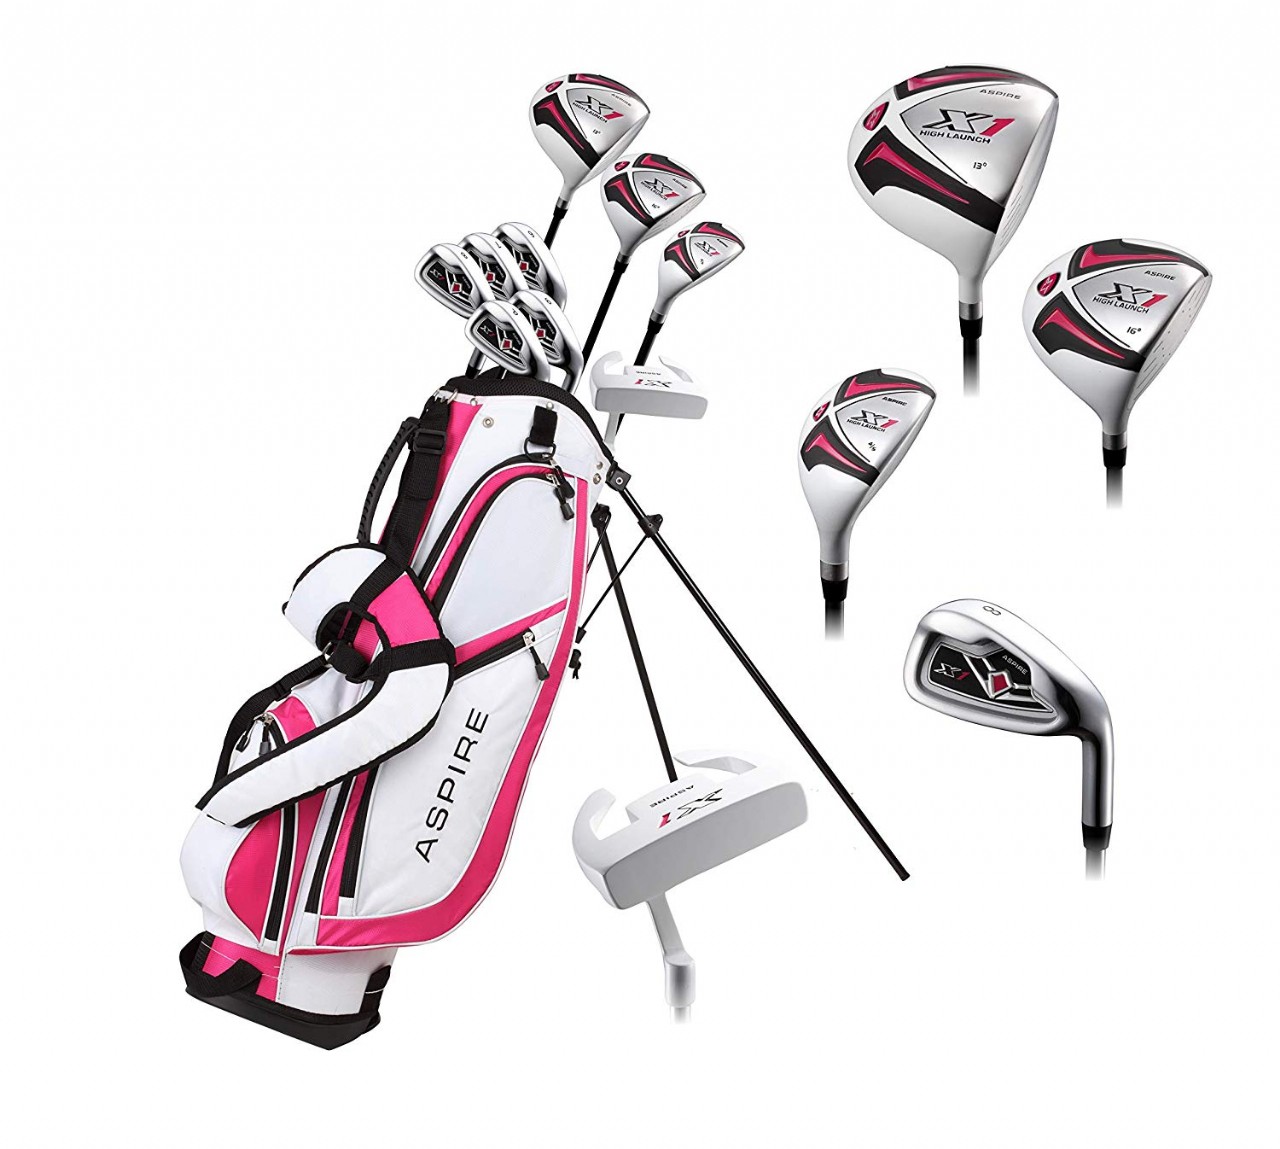 Ladies Womens Complete Right Handed Golf Clubs Set Includes Driver, Fairway, Hybrid, 6-PW Irons, Put